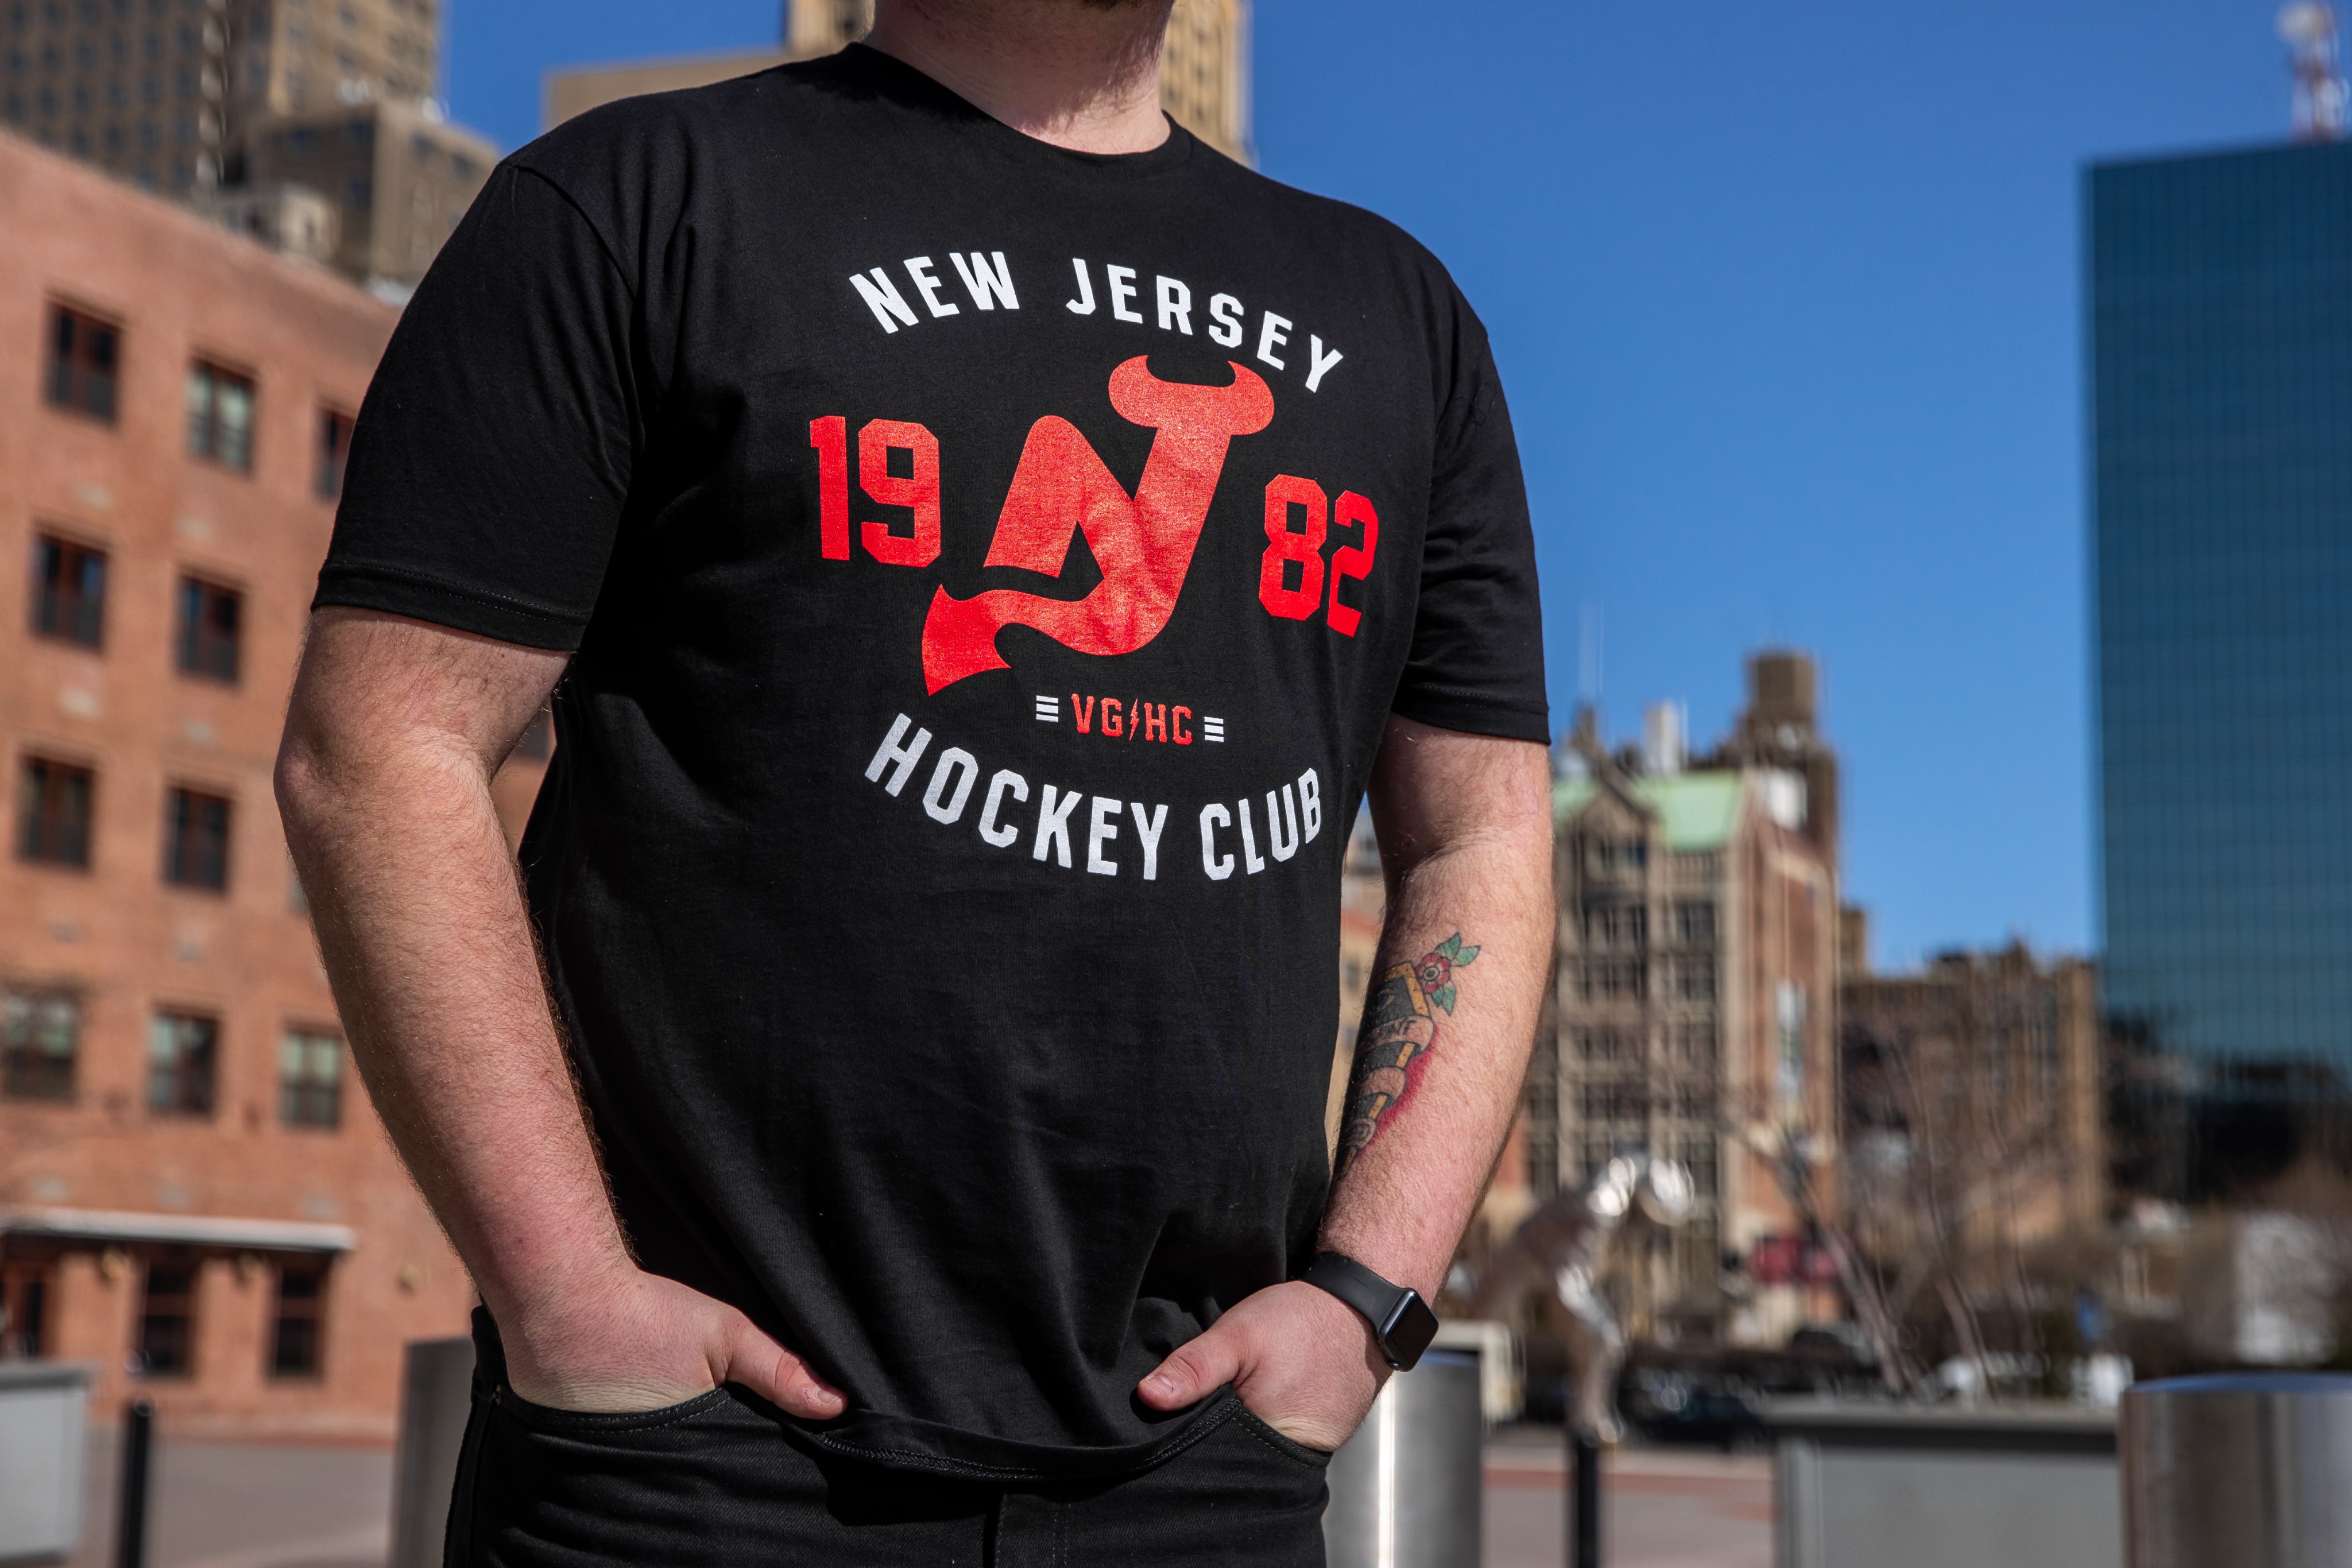 Jay Weinberg on X: WOW. Need to find a friend in NJ to hit the Devils Den  for me. Well done @ViolentGents @NJDevils / X